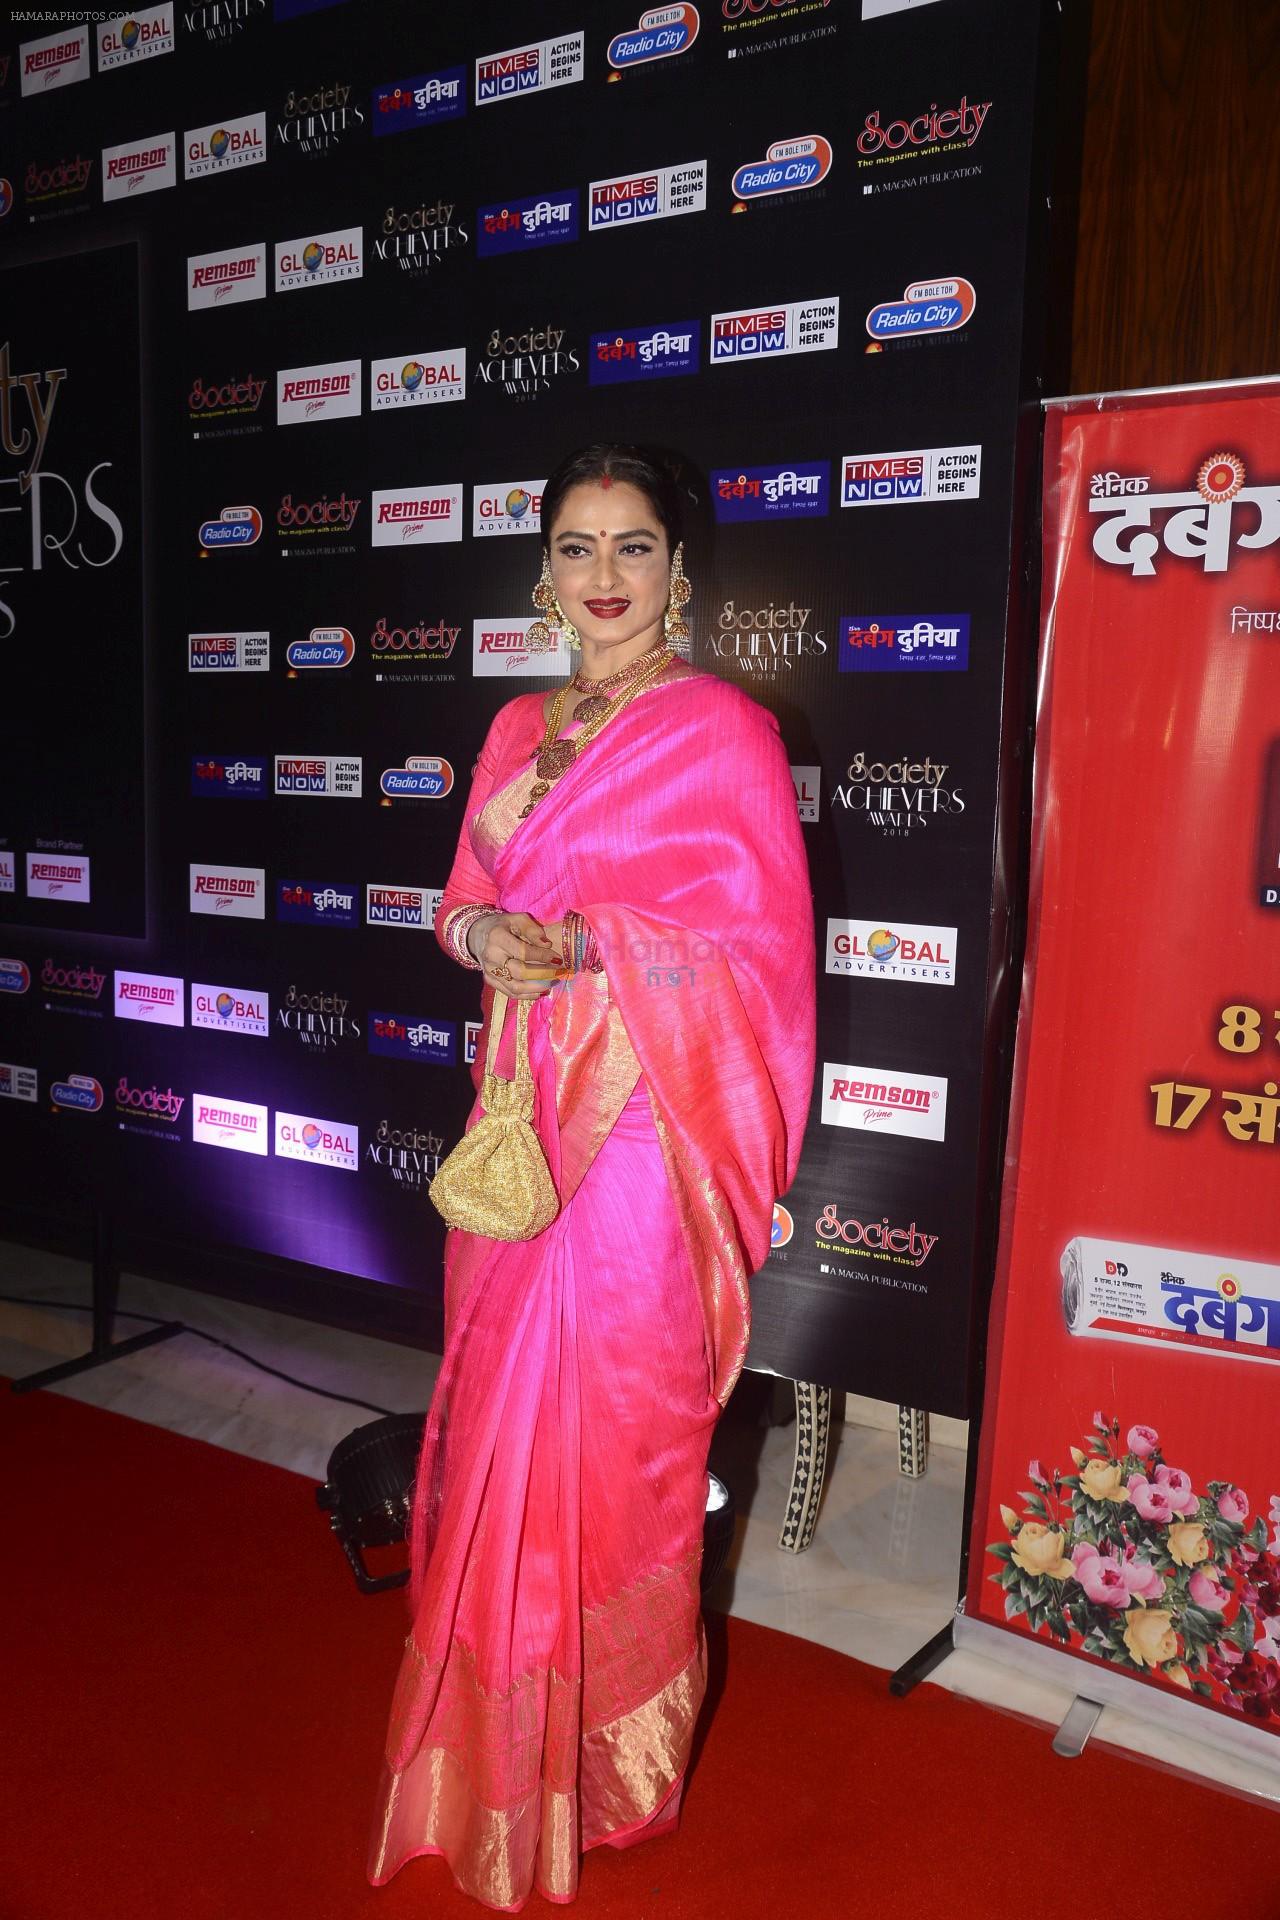 Rekha attend Society Achievers Awards 2018 on 14th Jan 2018